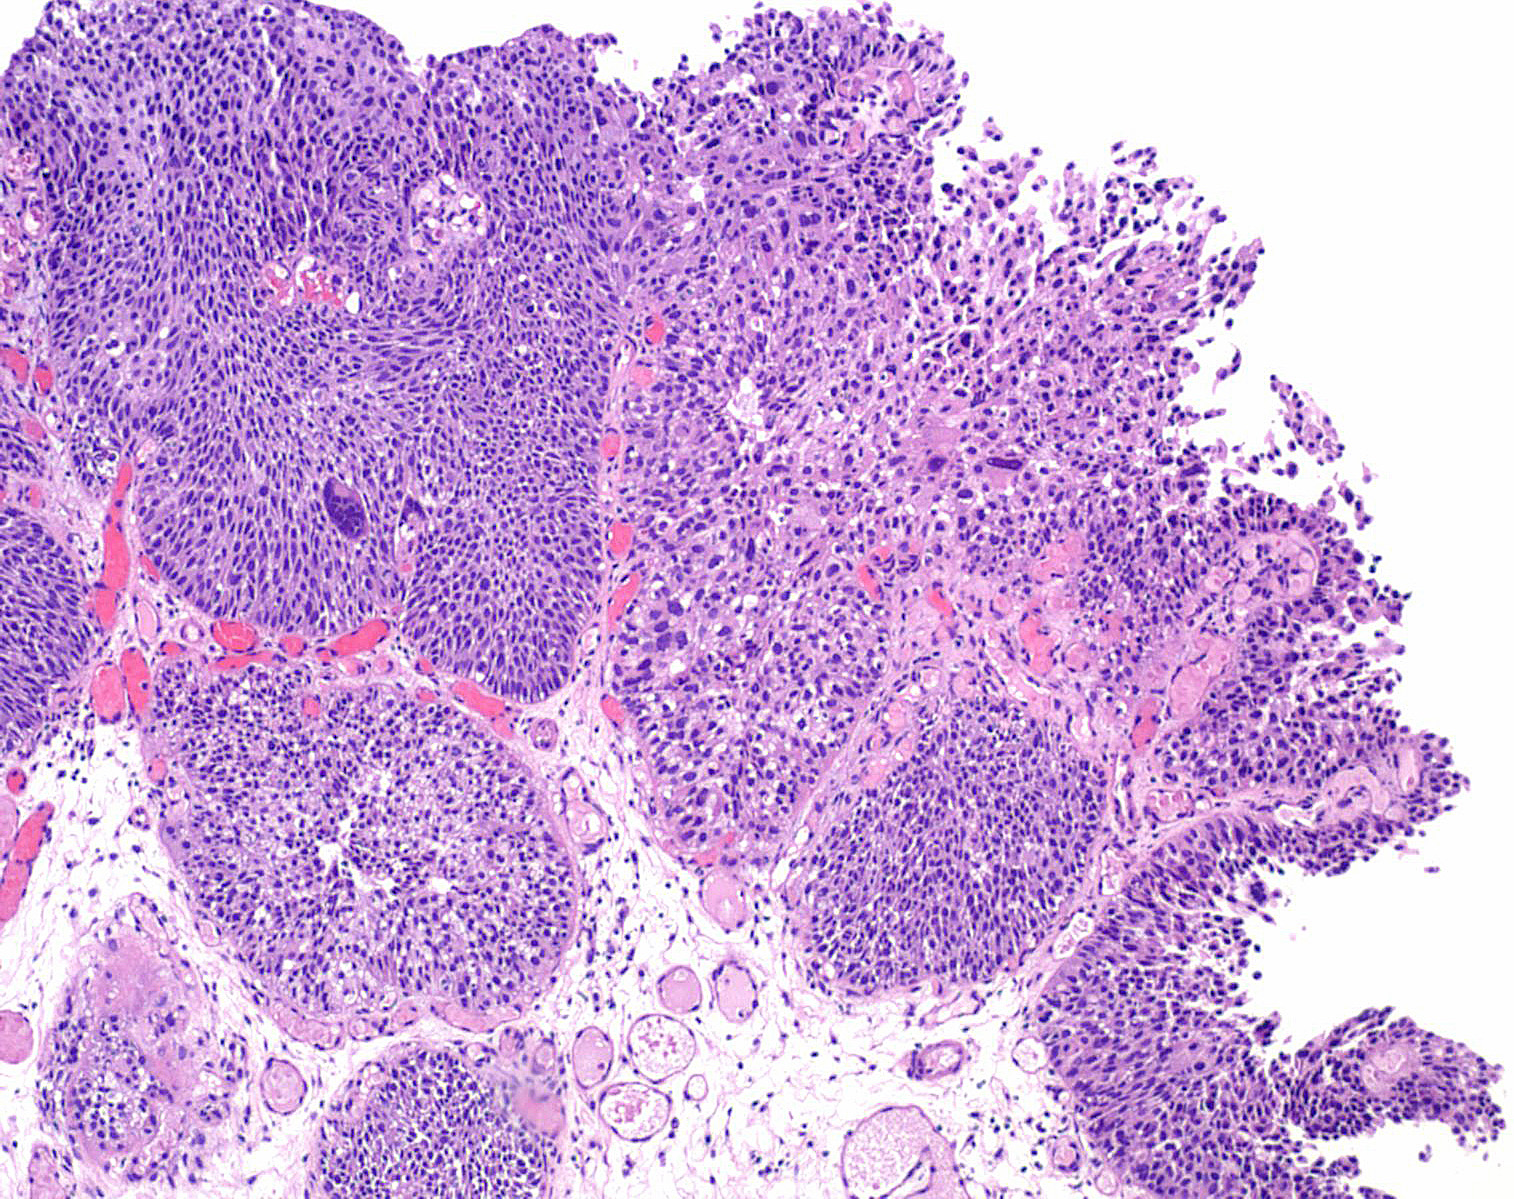 Papillary urothelial lesion of low malignant potential